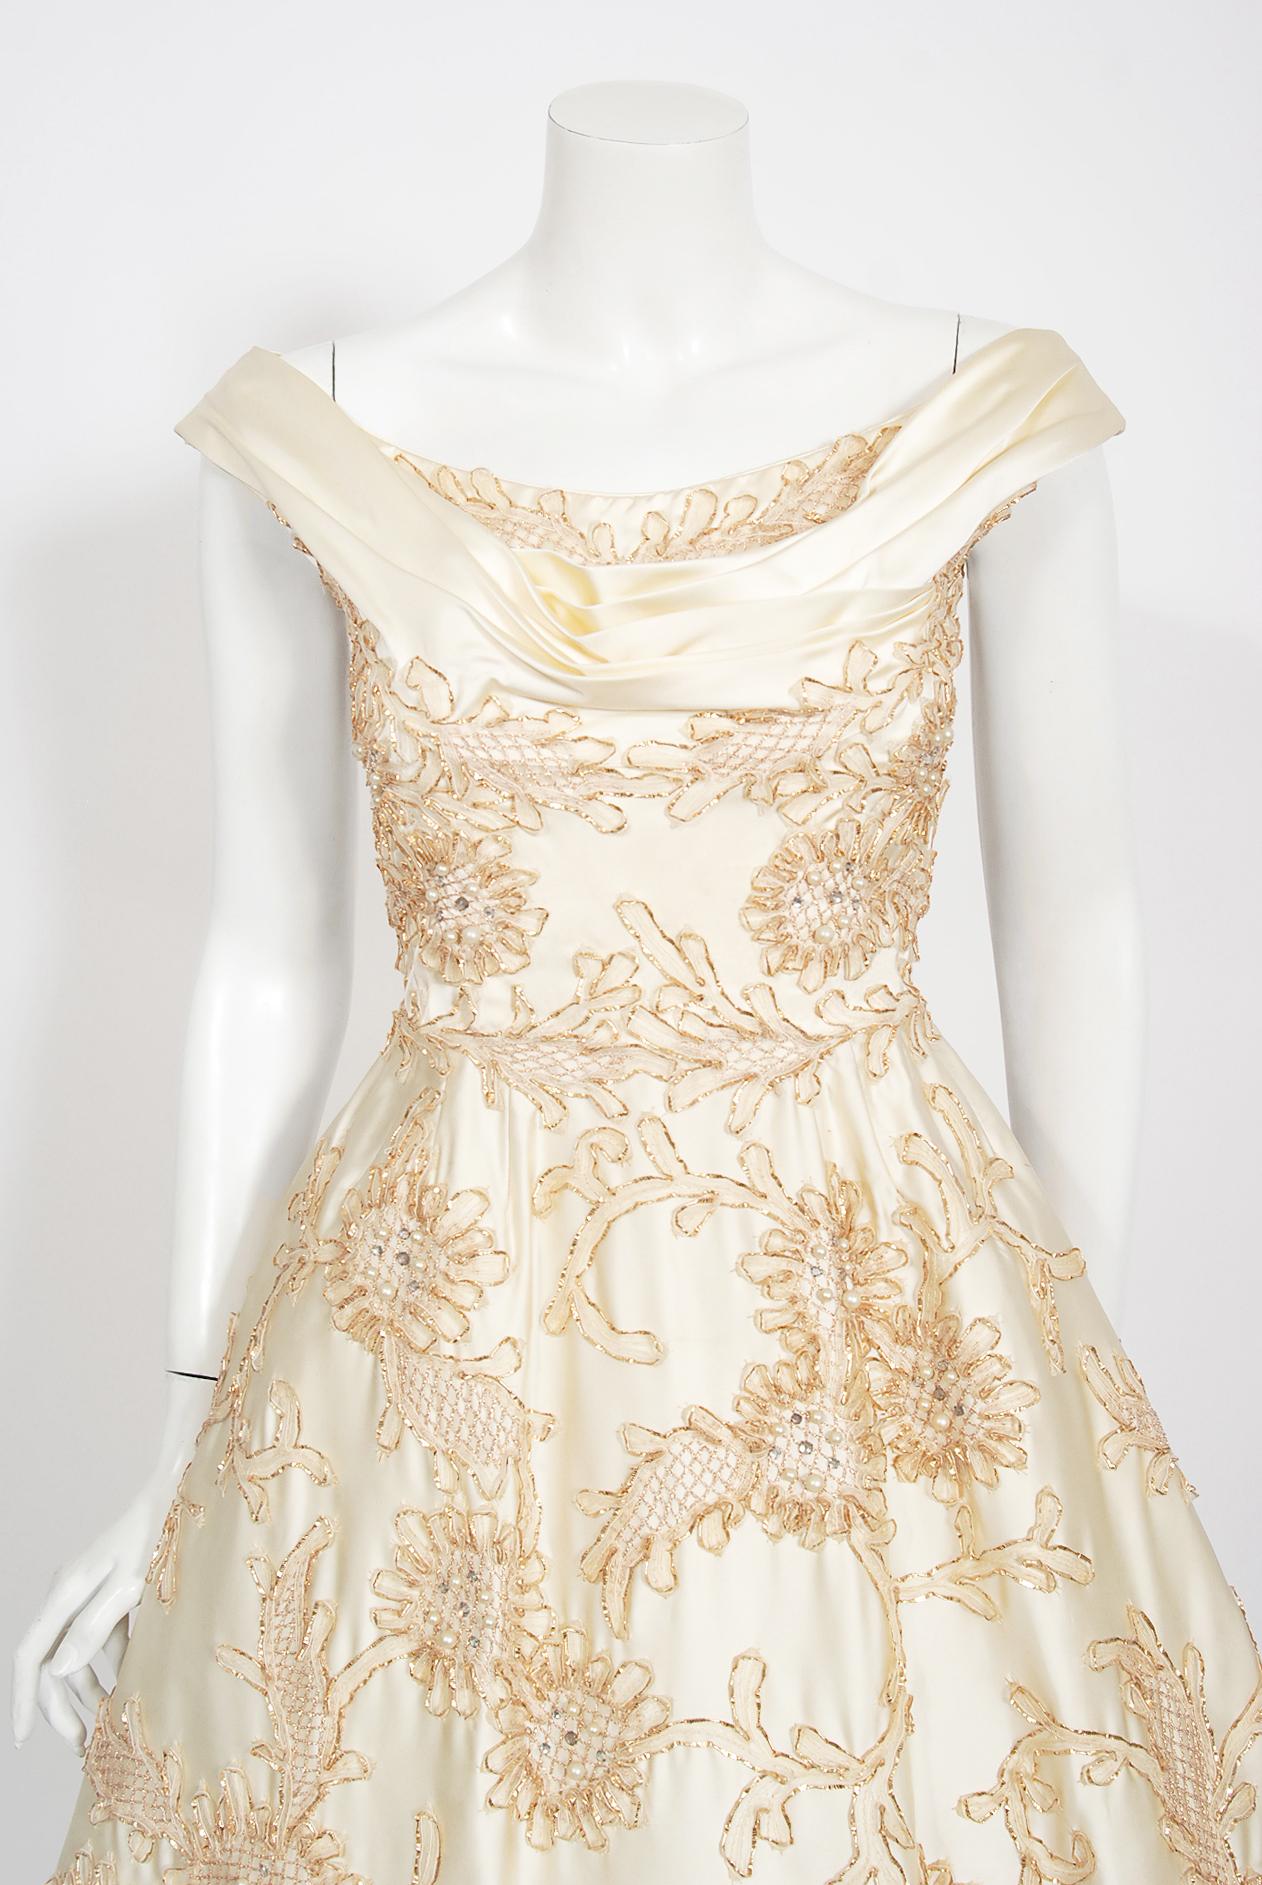 This is such a romantic and ethereal 1950's silk-satin party dress from the iconic Ceil Chapman label. Ceil Chapman was an American designer who successfully took Paris haute couture designs that most woman coveted and made high-quality dresses that